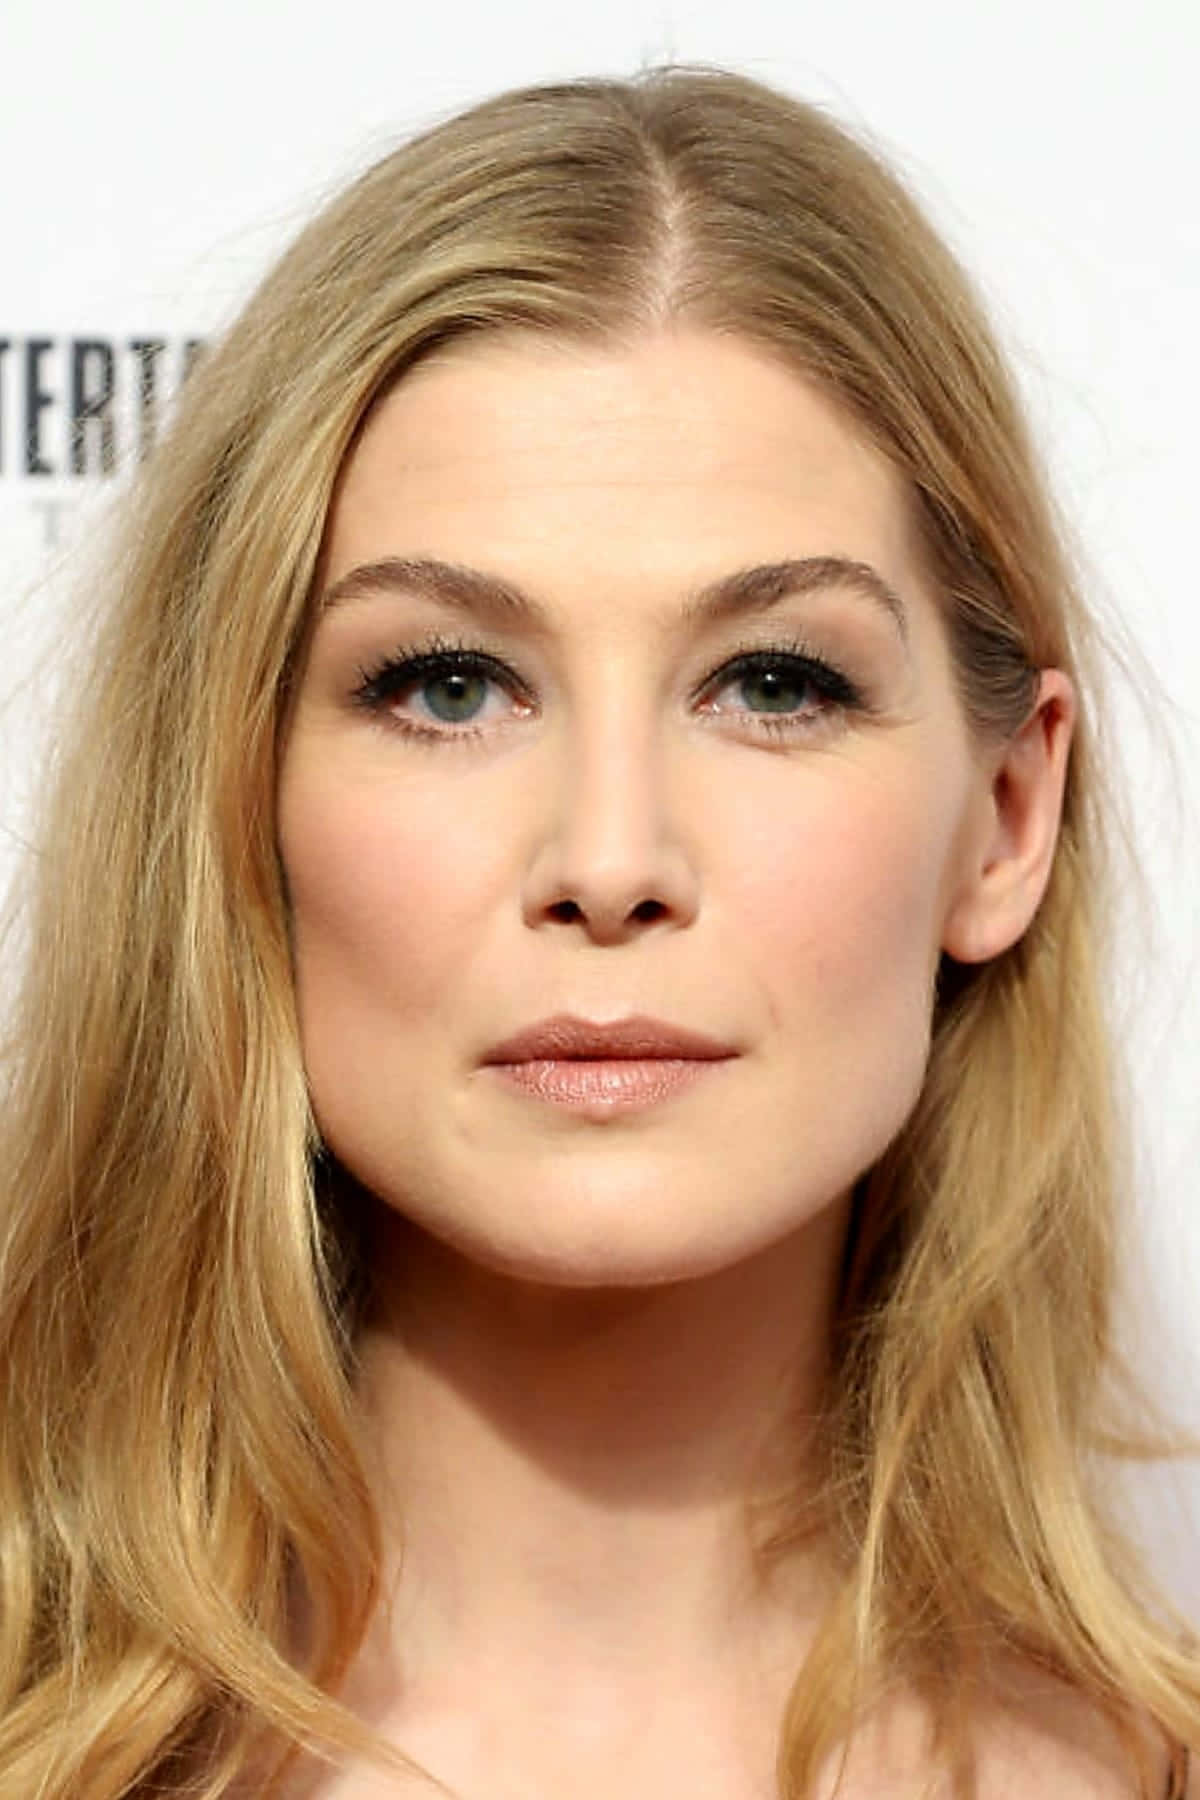 Rosamund Pike At A Red Carpet Event Background